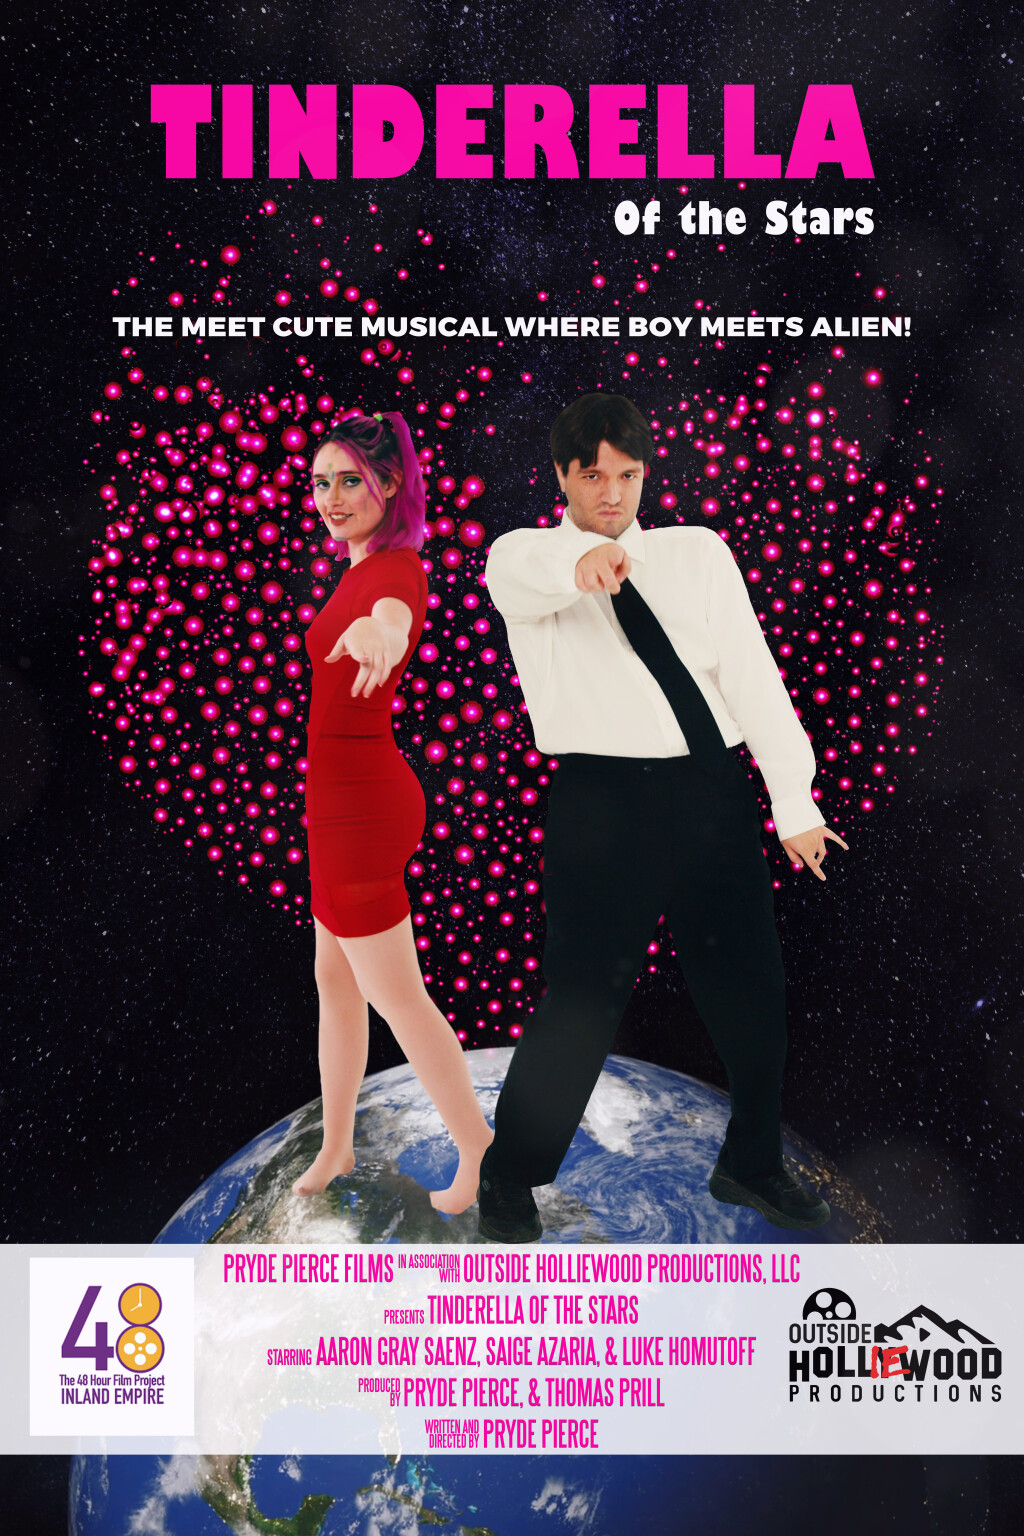 Filmposter for Tinderella of the Stars